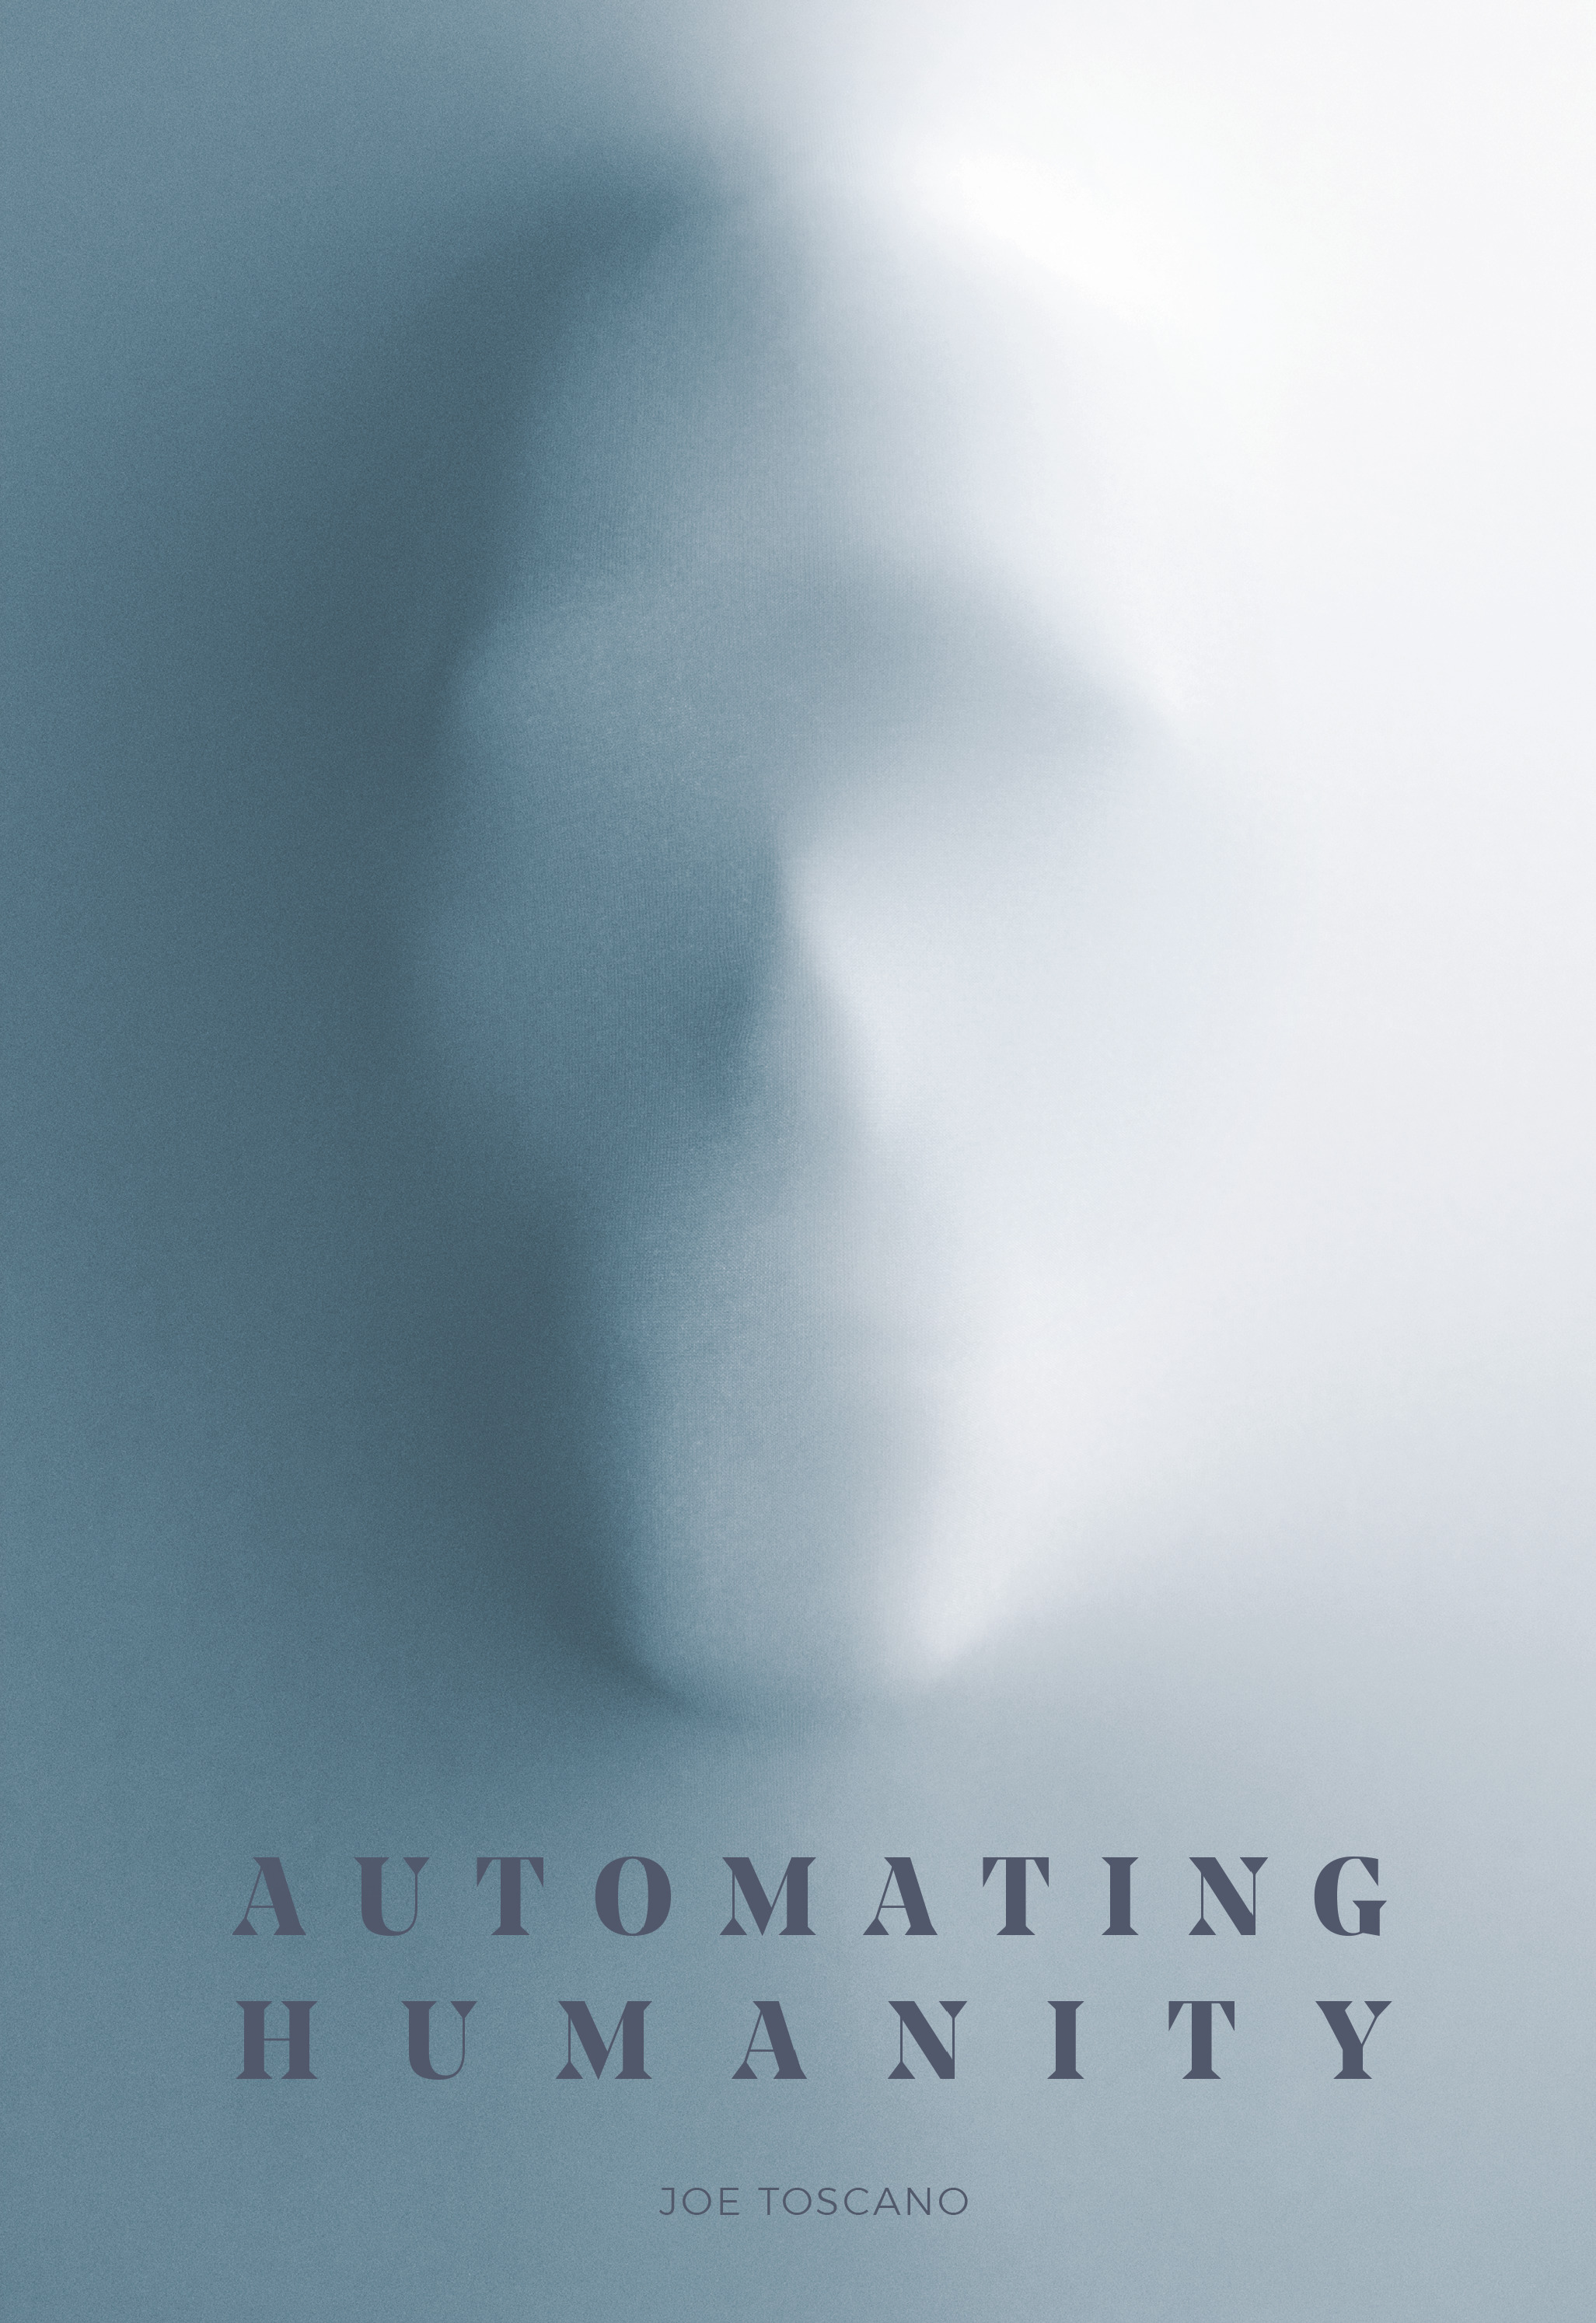 OFF SITE Book Discussion and Signing For Automating Humanity by Joe Toscano